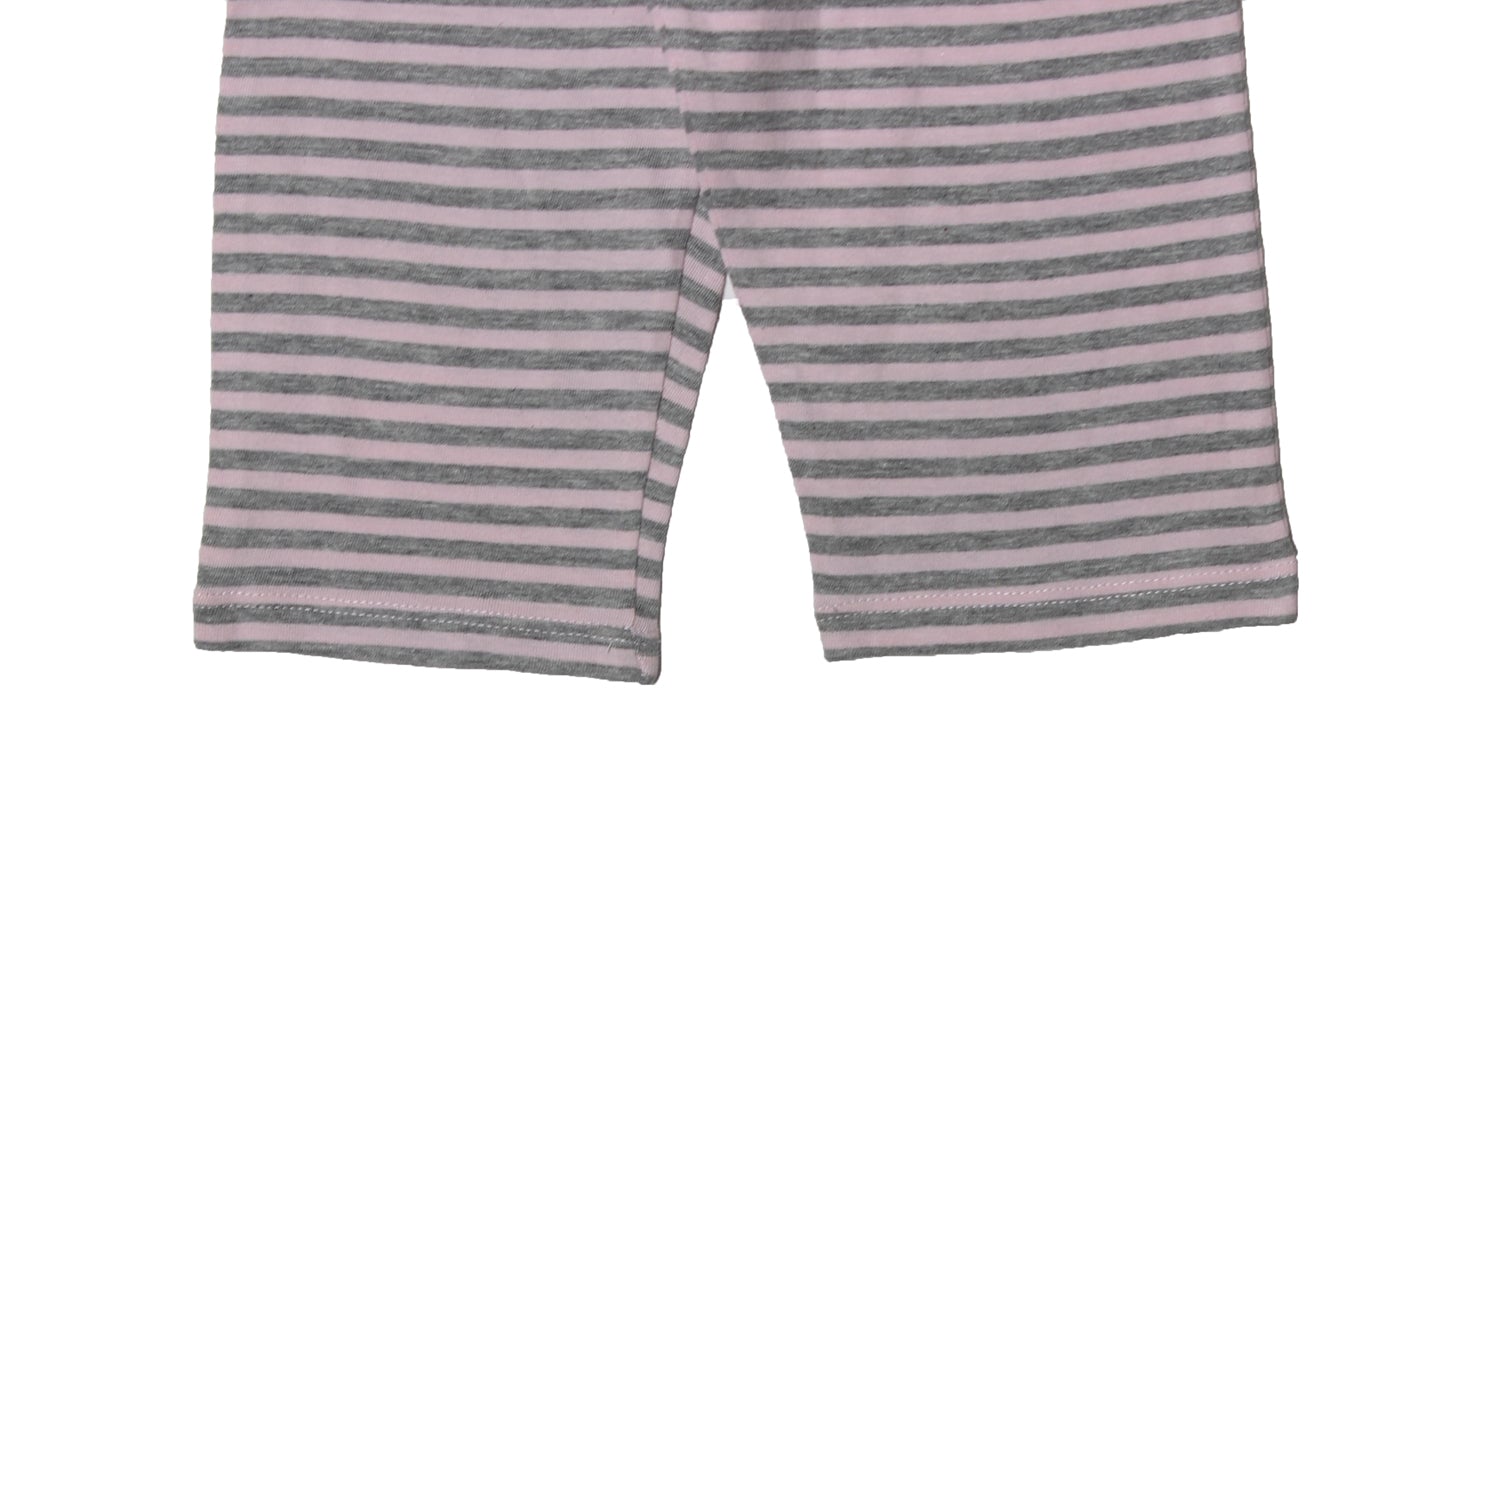 NEW BABY PINK WITH GREY STRIPES PAJAMA FOR GIRLS